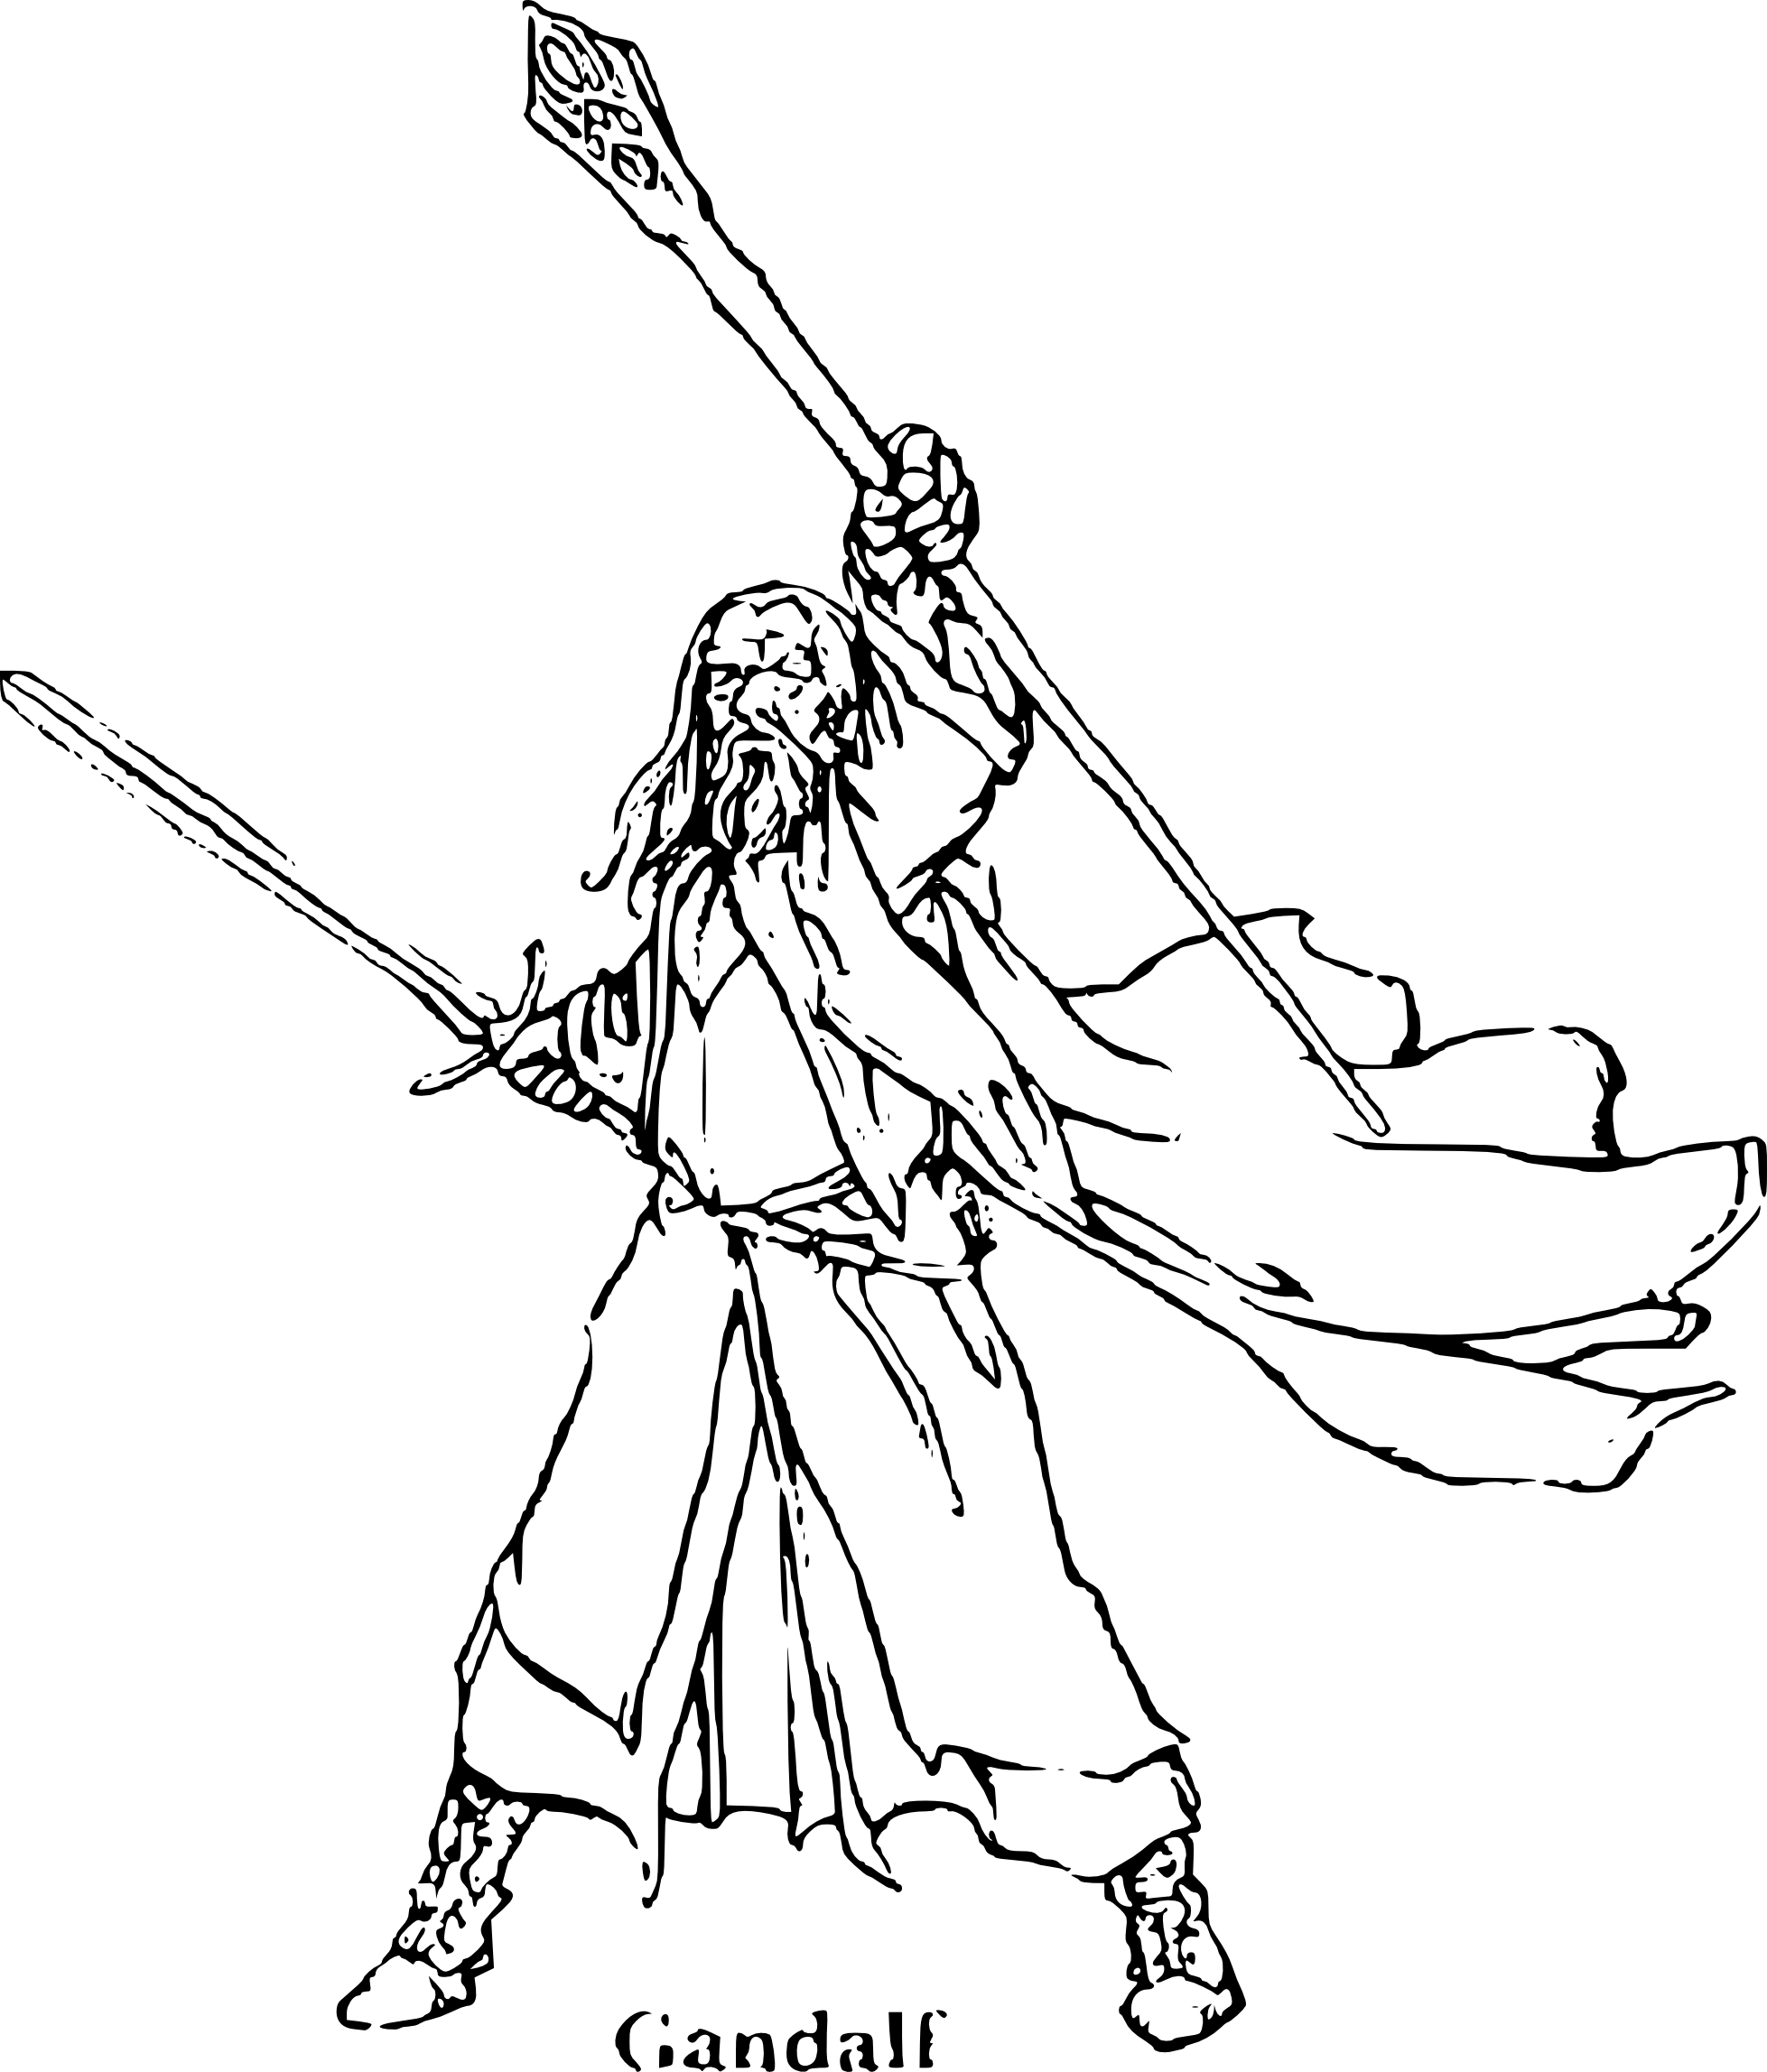 Gandalf The Lord Of The Rings coloring page